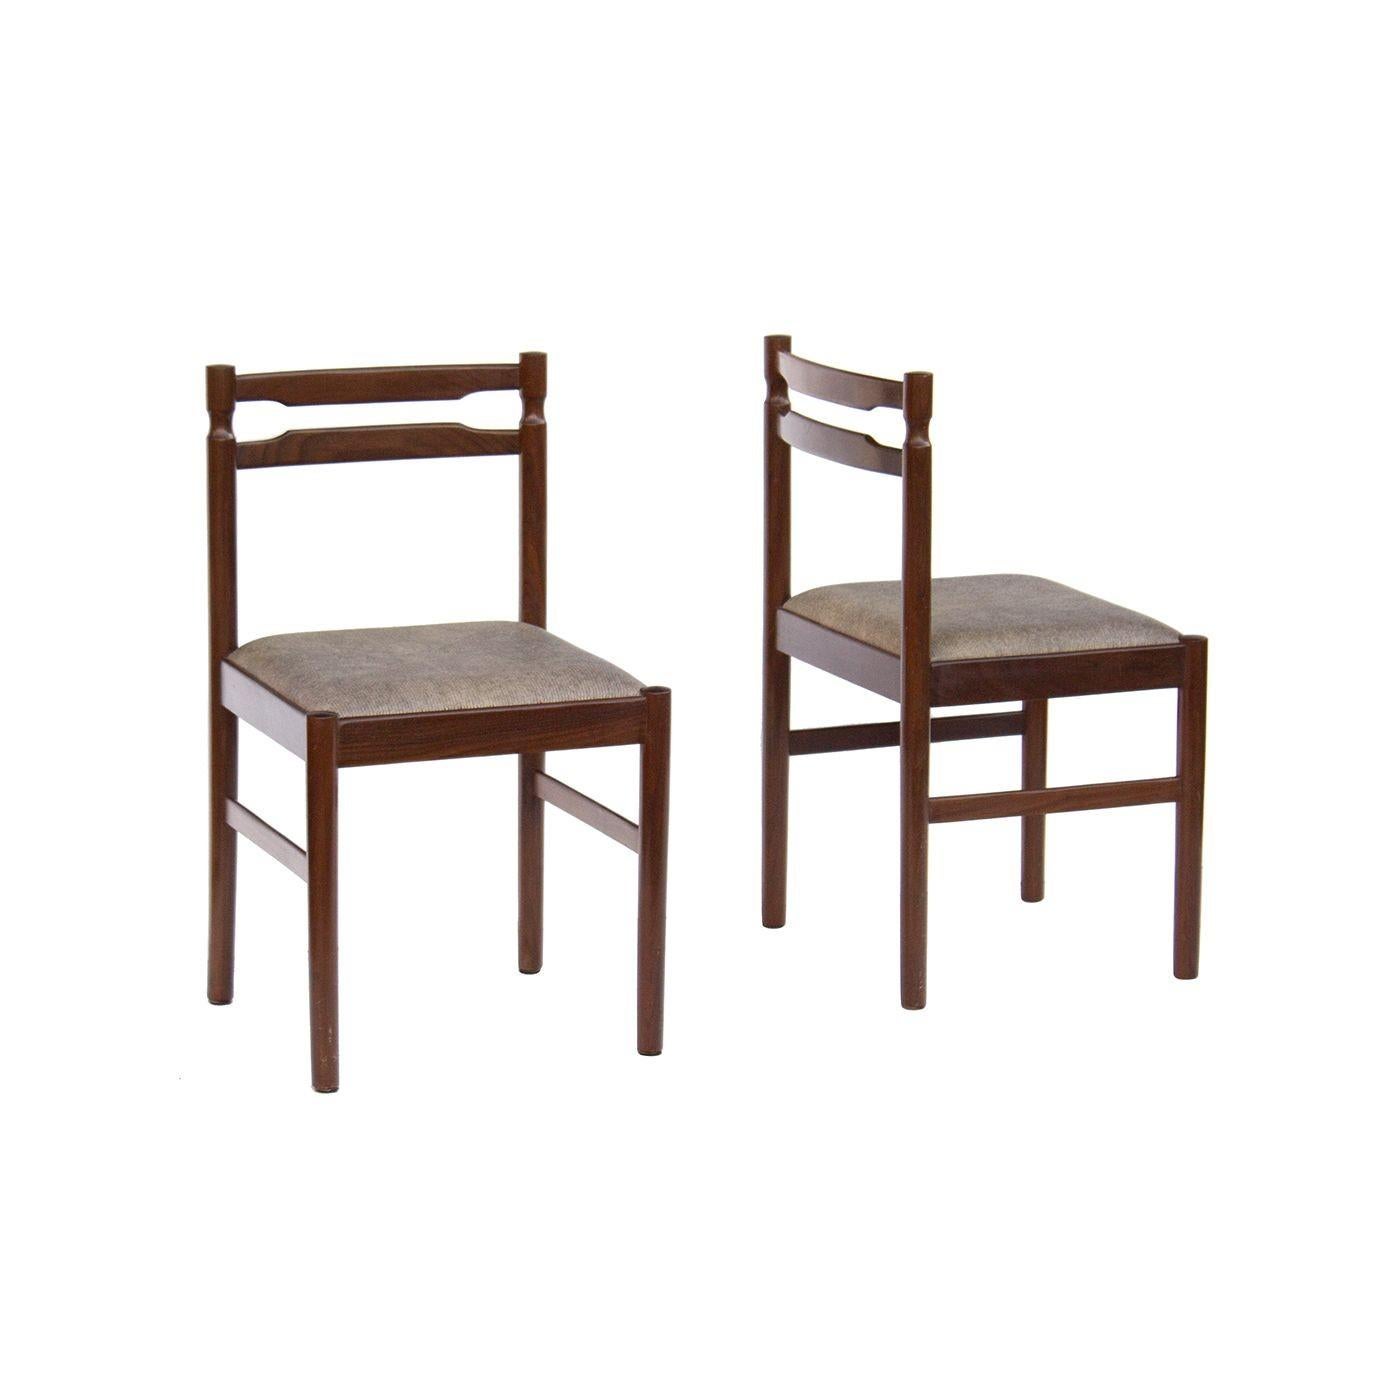 Rosewood Scandinavian Dining Chairs, S/6 For Sale